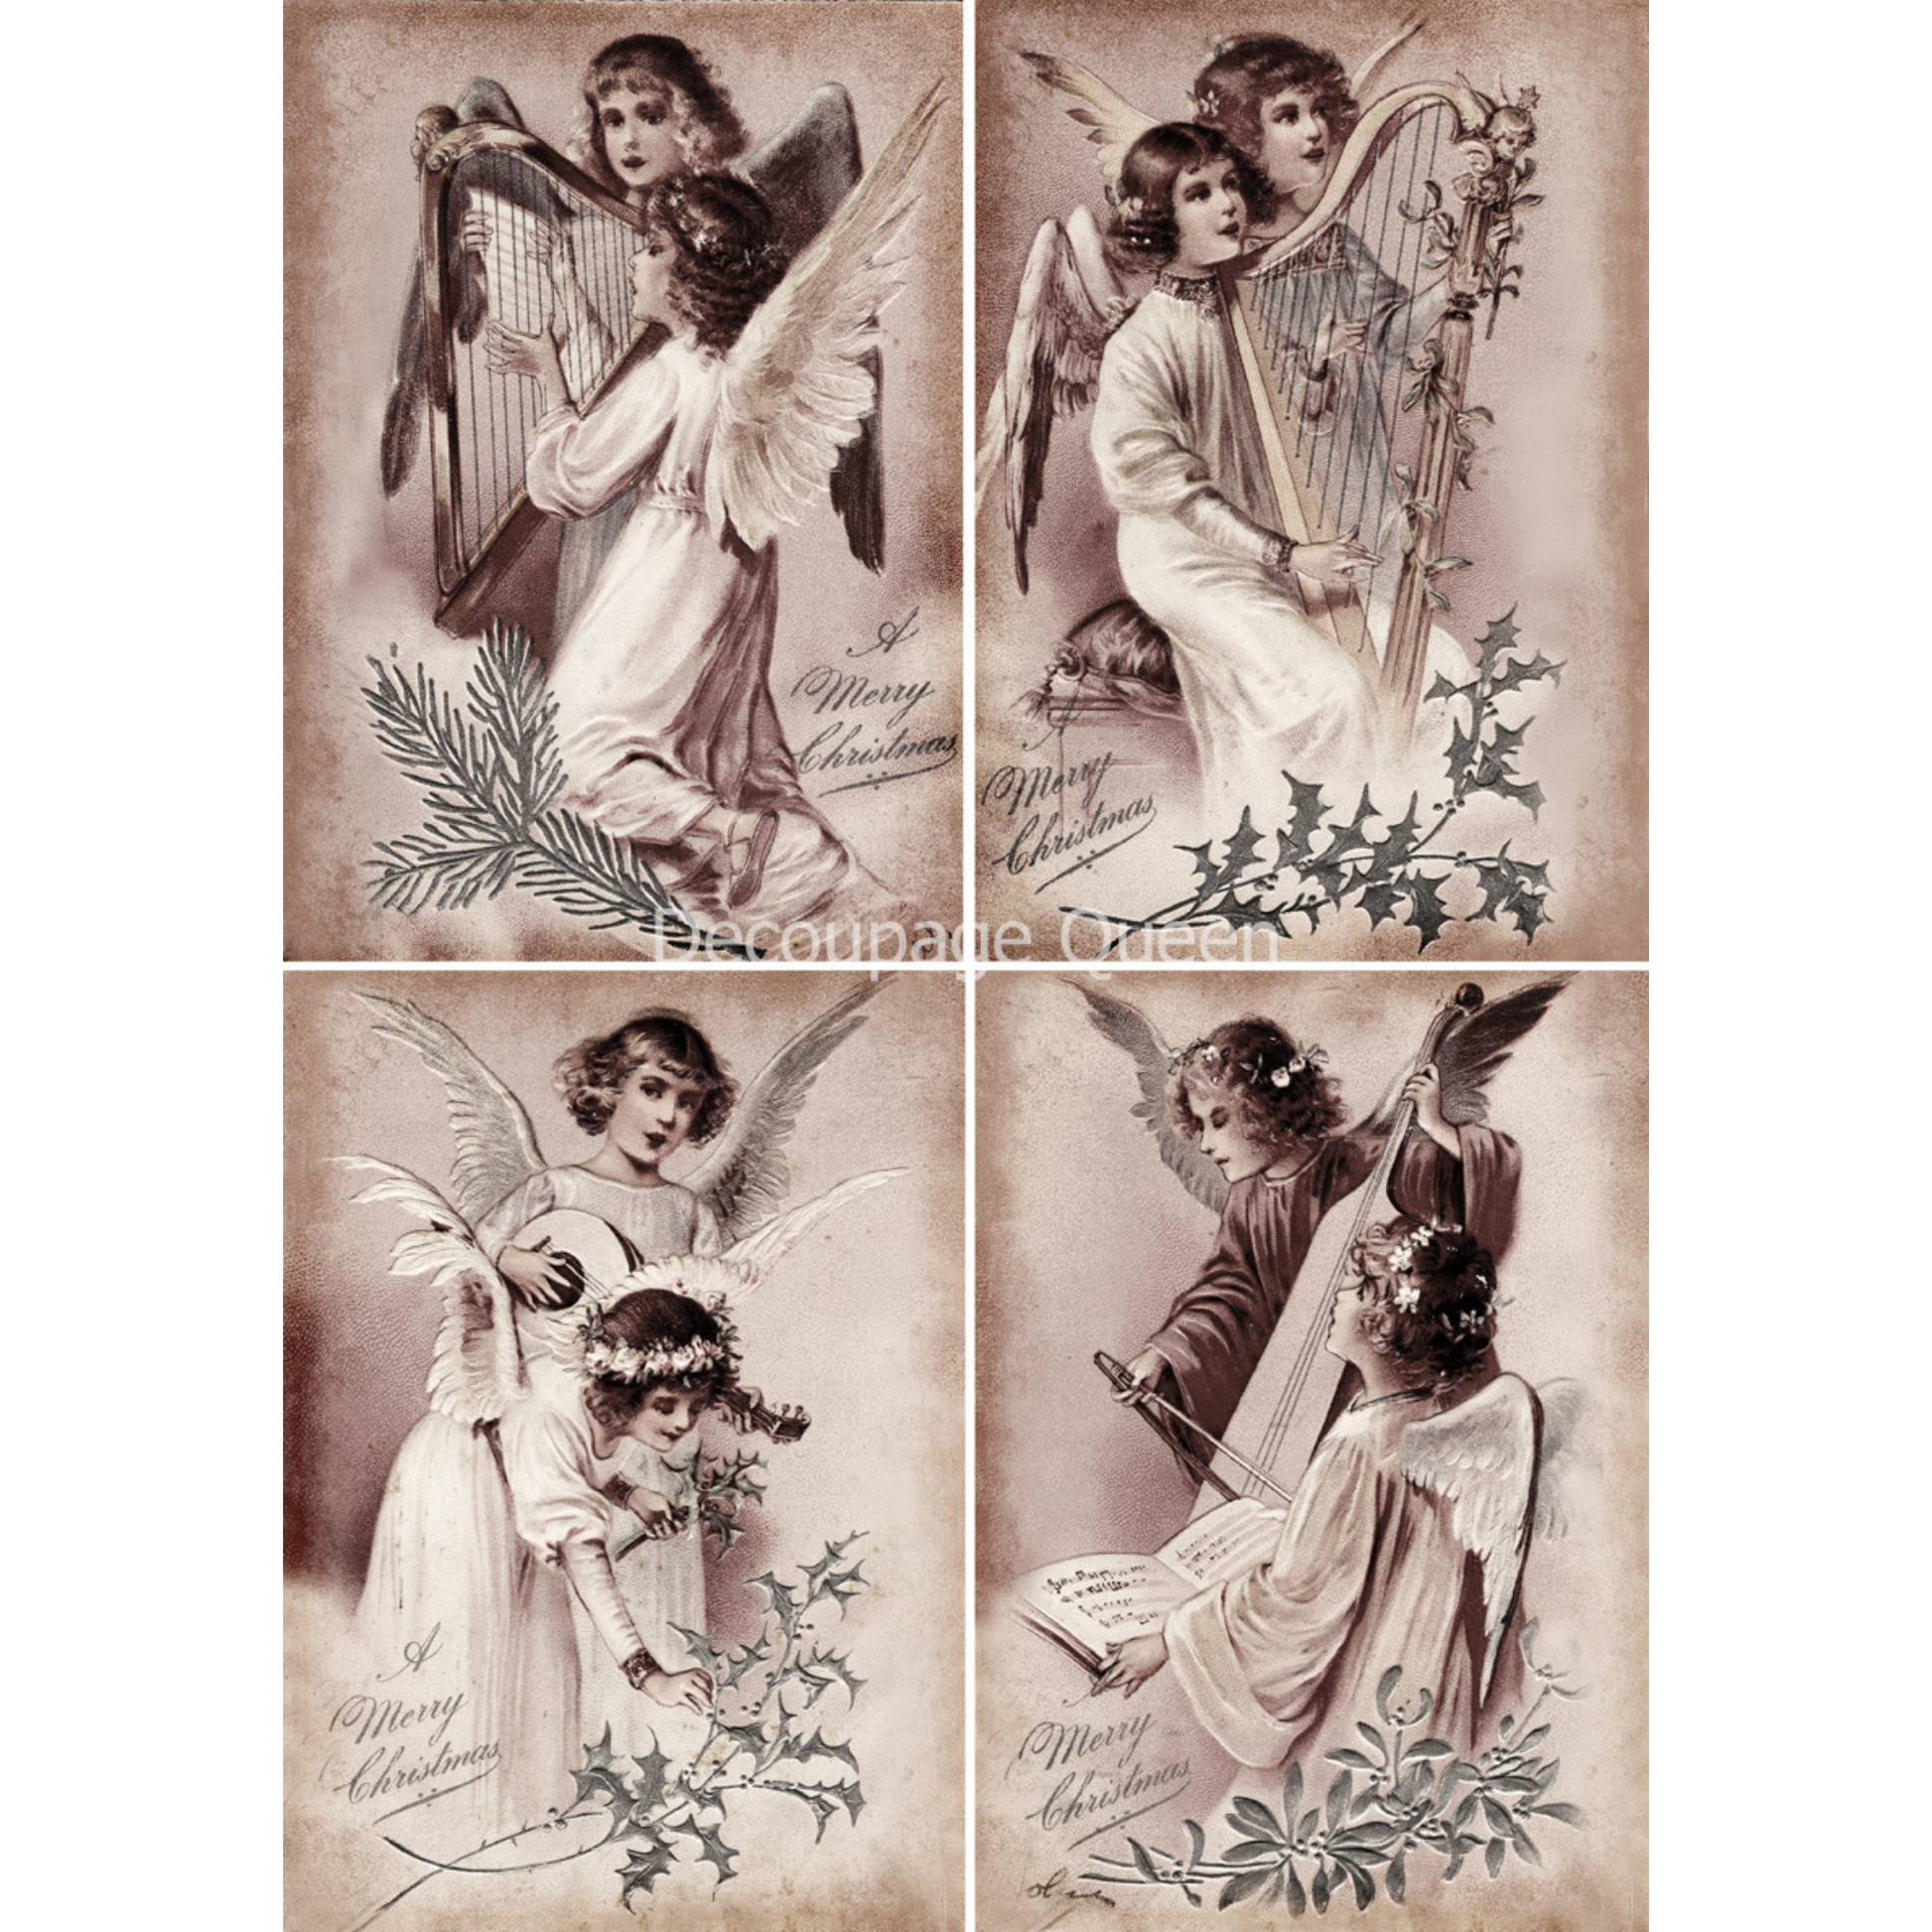 "Choral Angels" decoupage rice paper by Decoupage Queen. Available at Milton's Daughter.